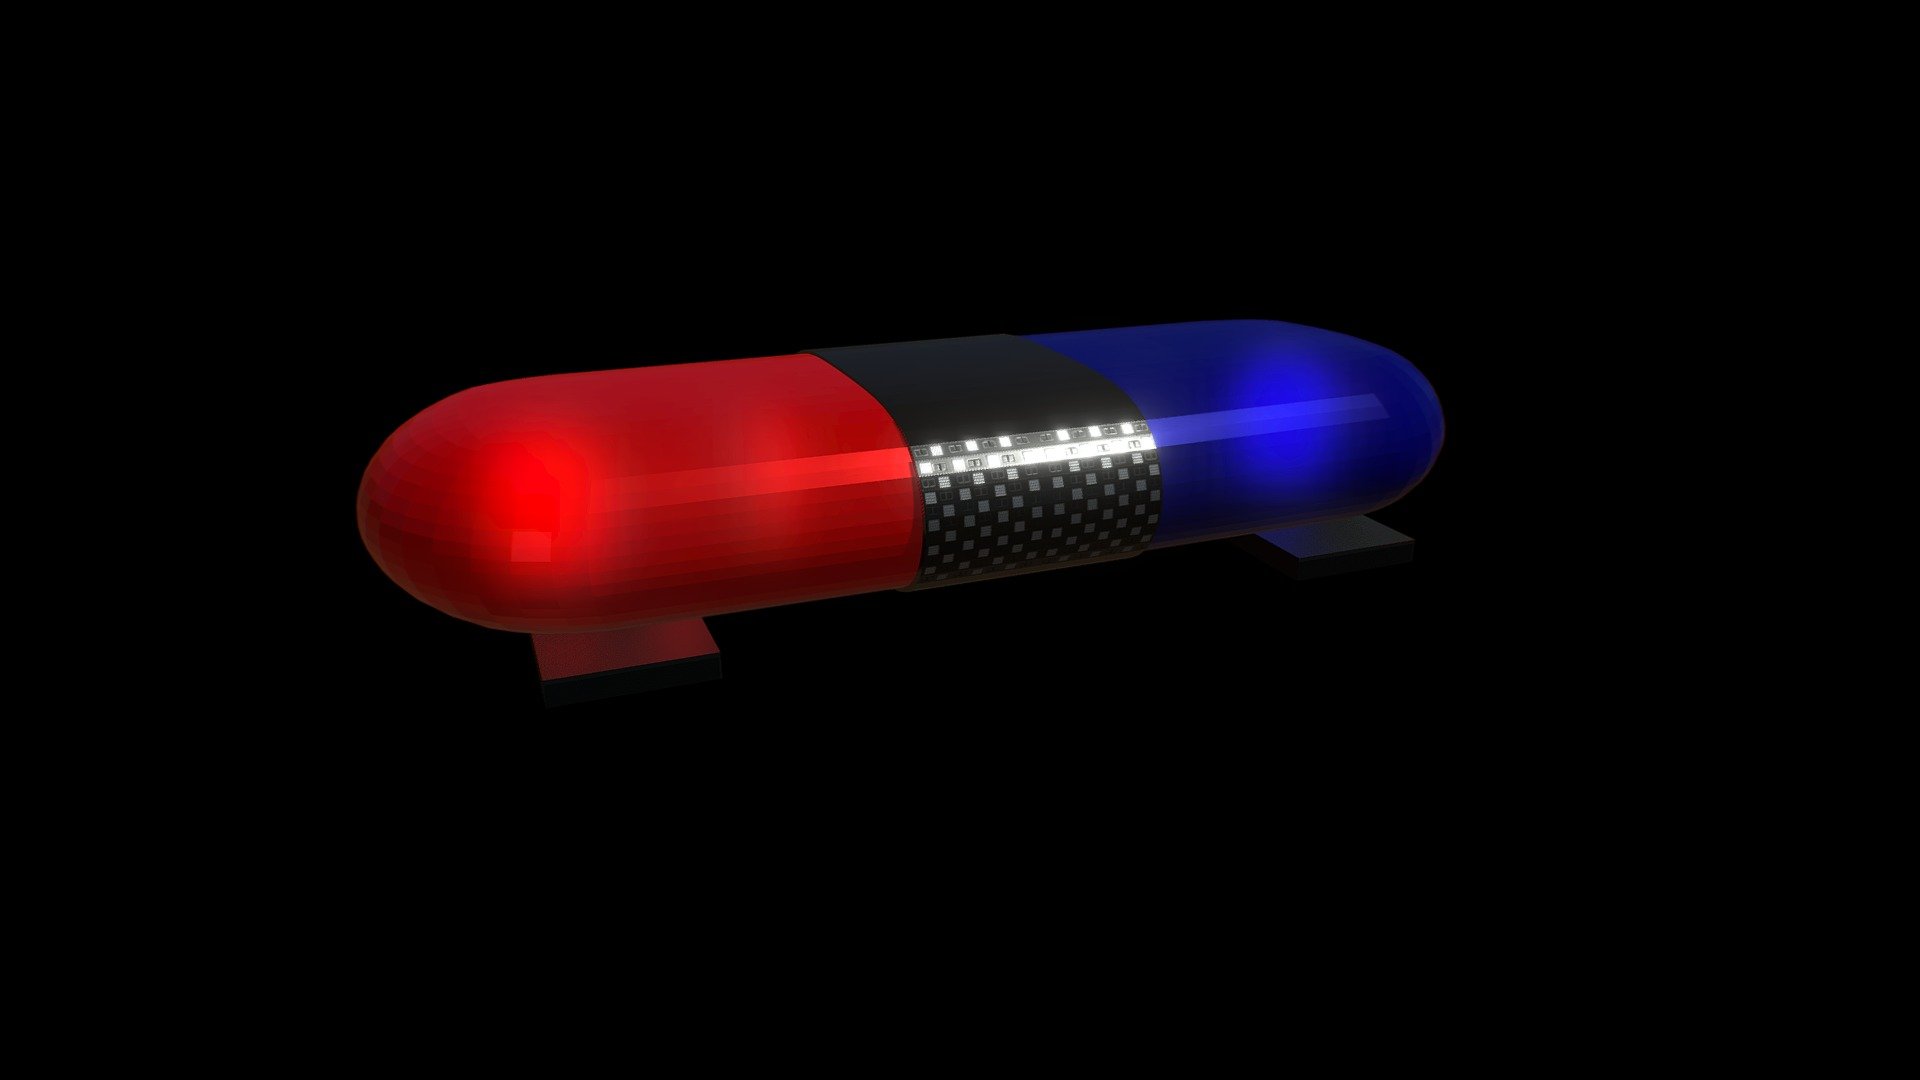 Police lighting fixture used for attracting attention or emergencies - Police Lights - Download Free 3D model by KIDosn 3d model